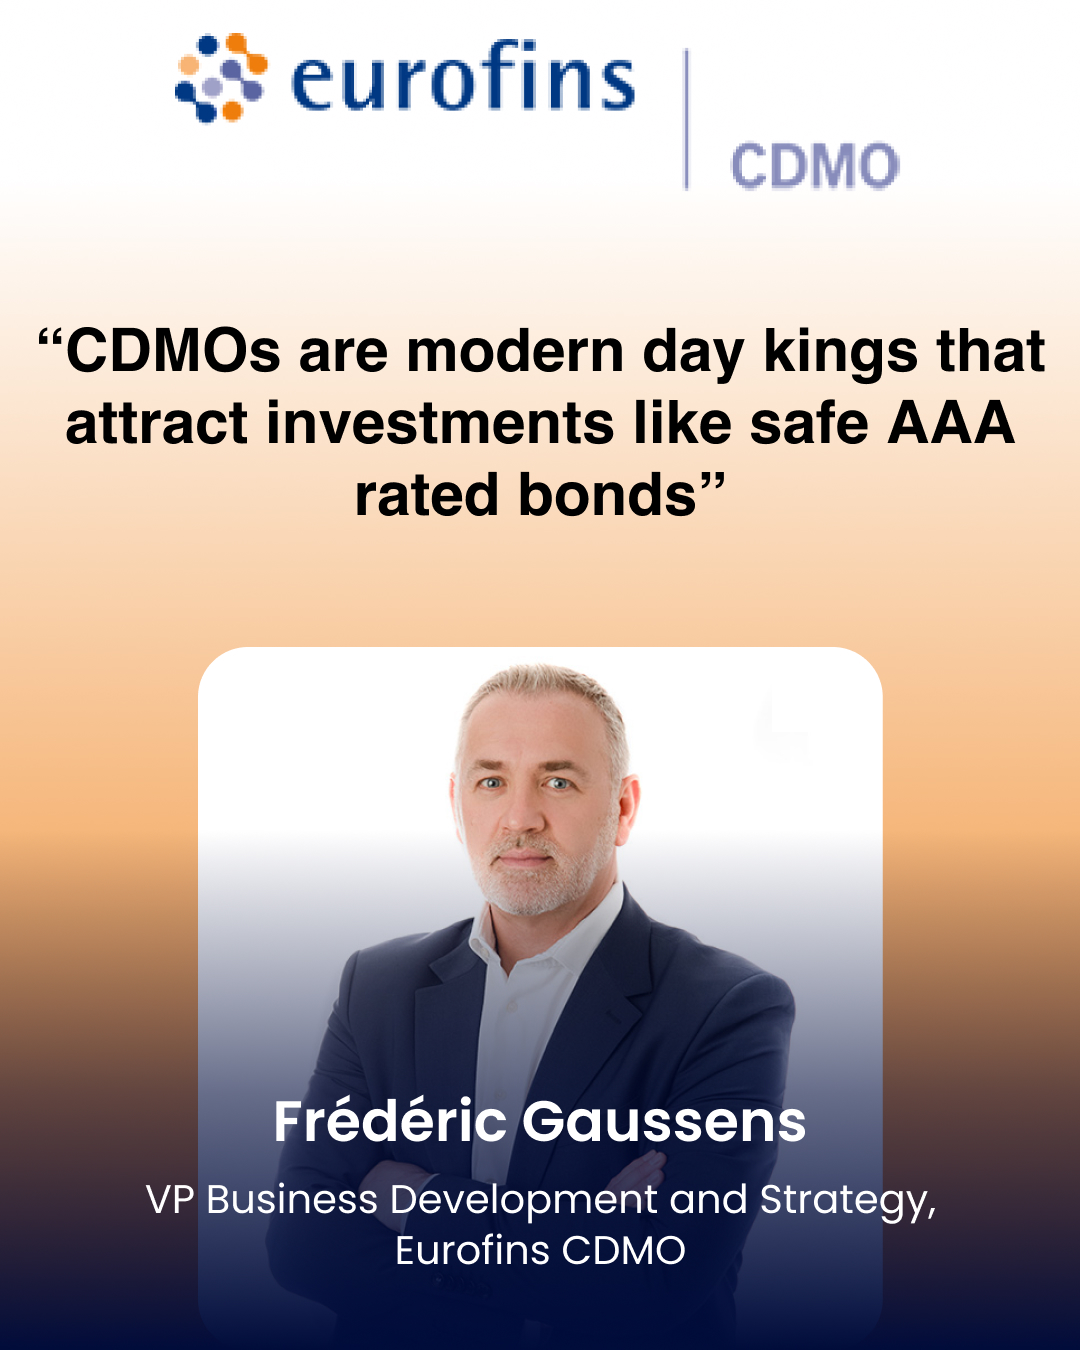 “CDMOs are modern day kings that attract investments like safe AAA rated bonds”